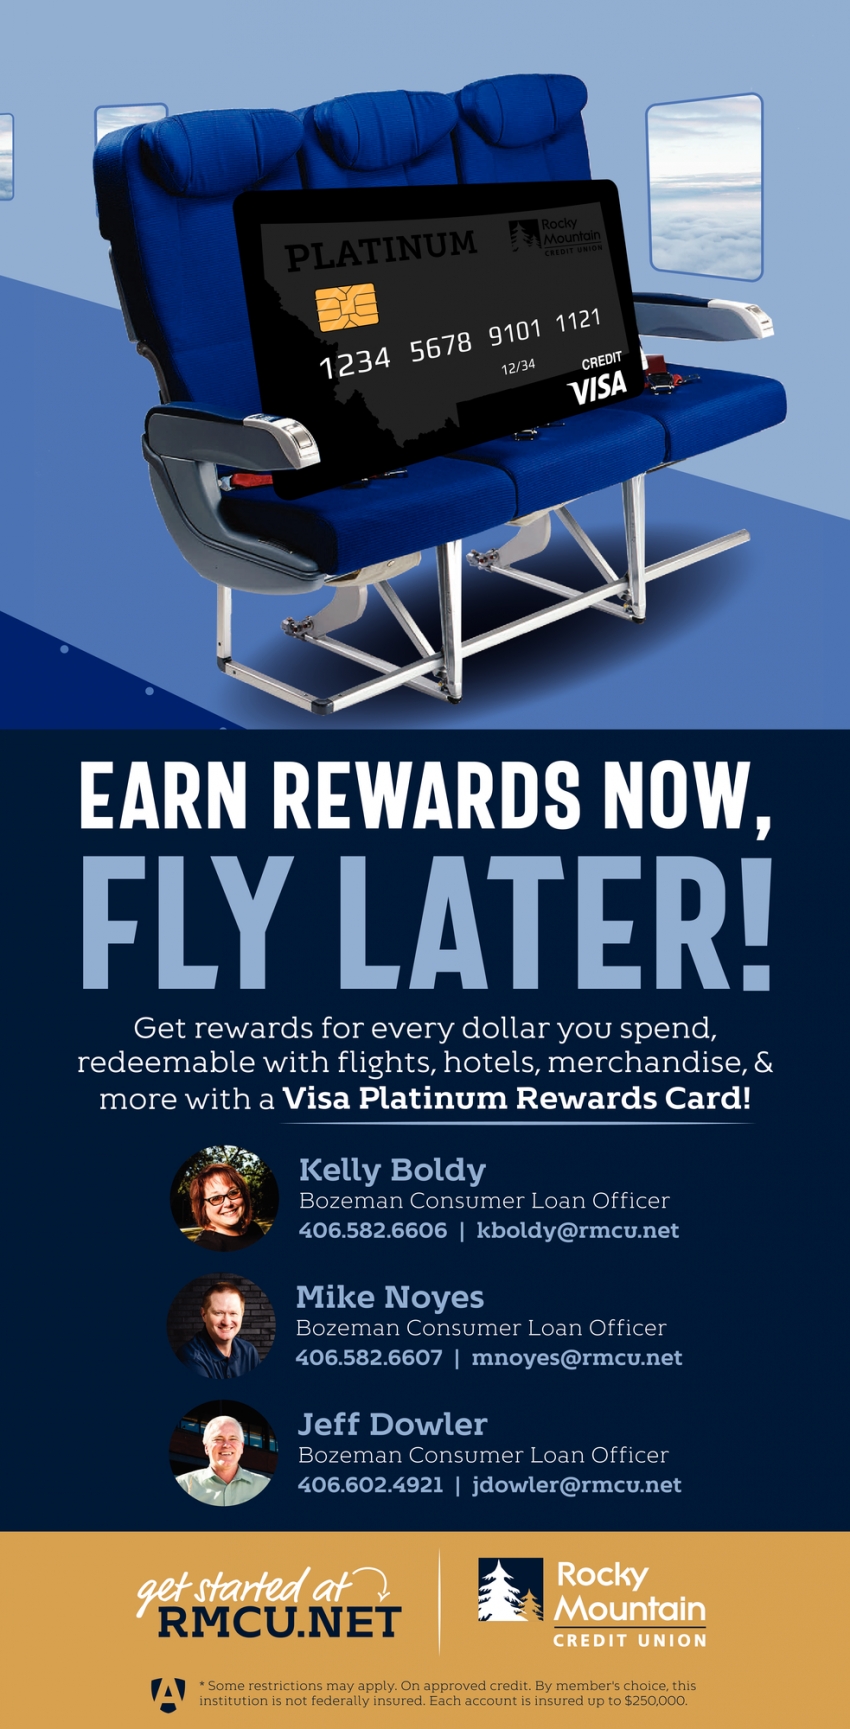 Earn Rewards Now, Fly Later!